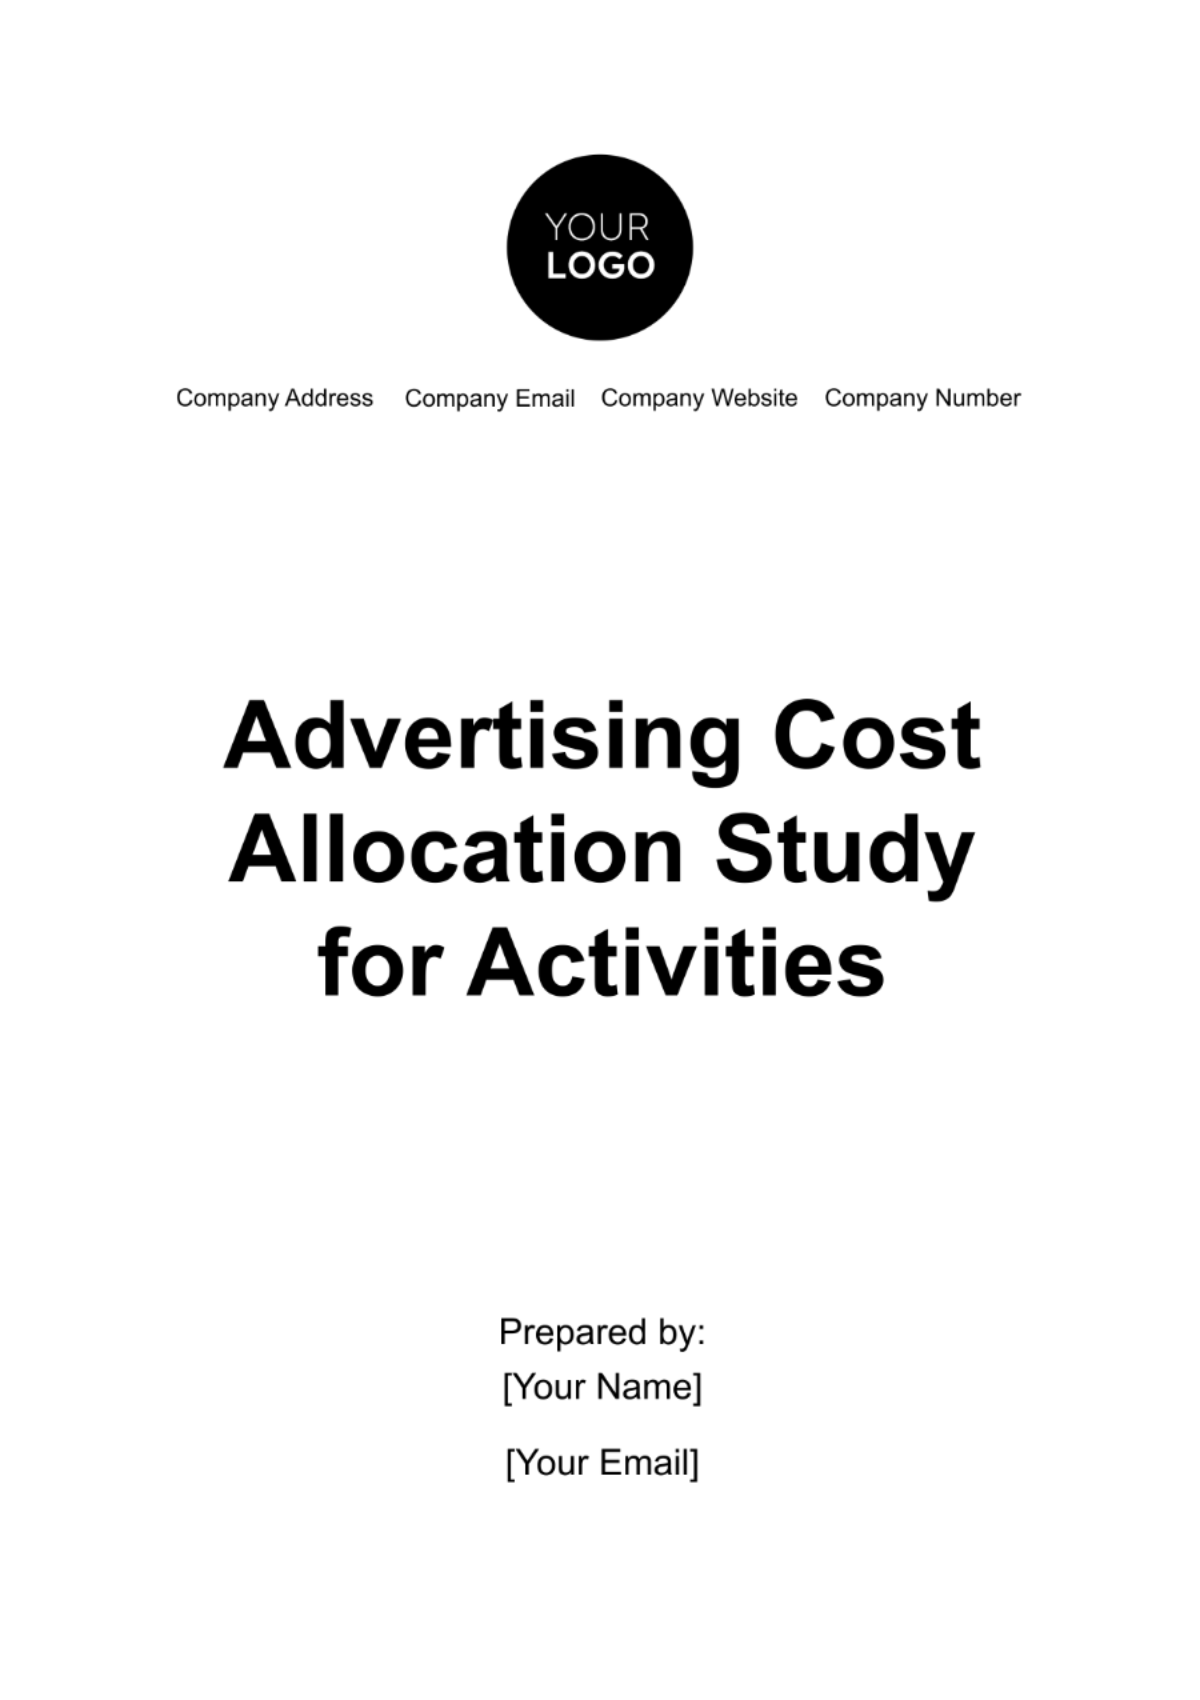 Advertising Cost Allocation Study for Activities Template